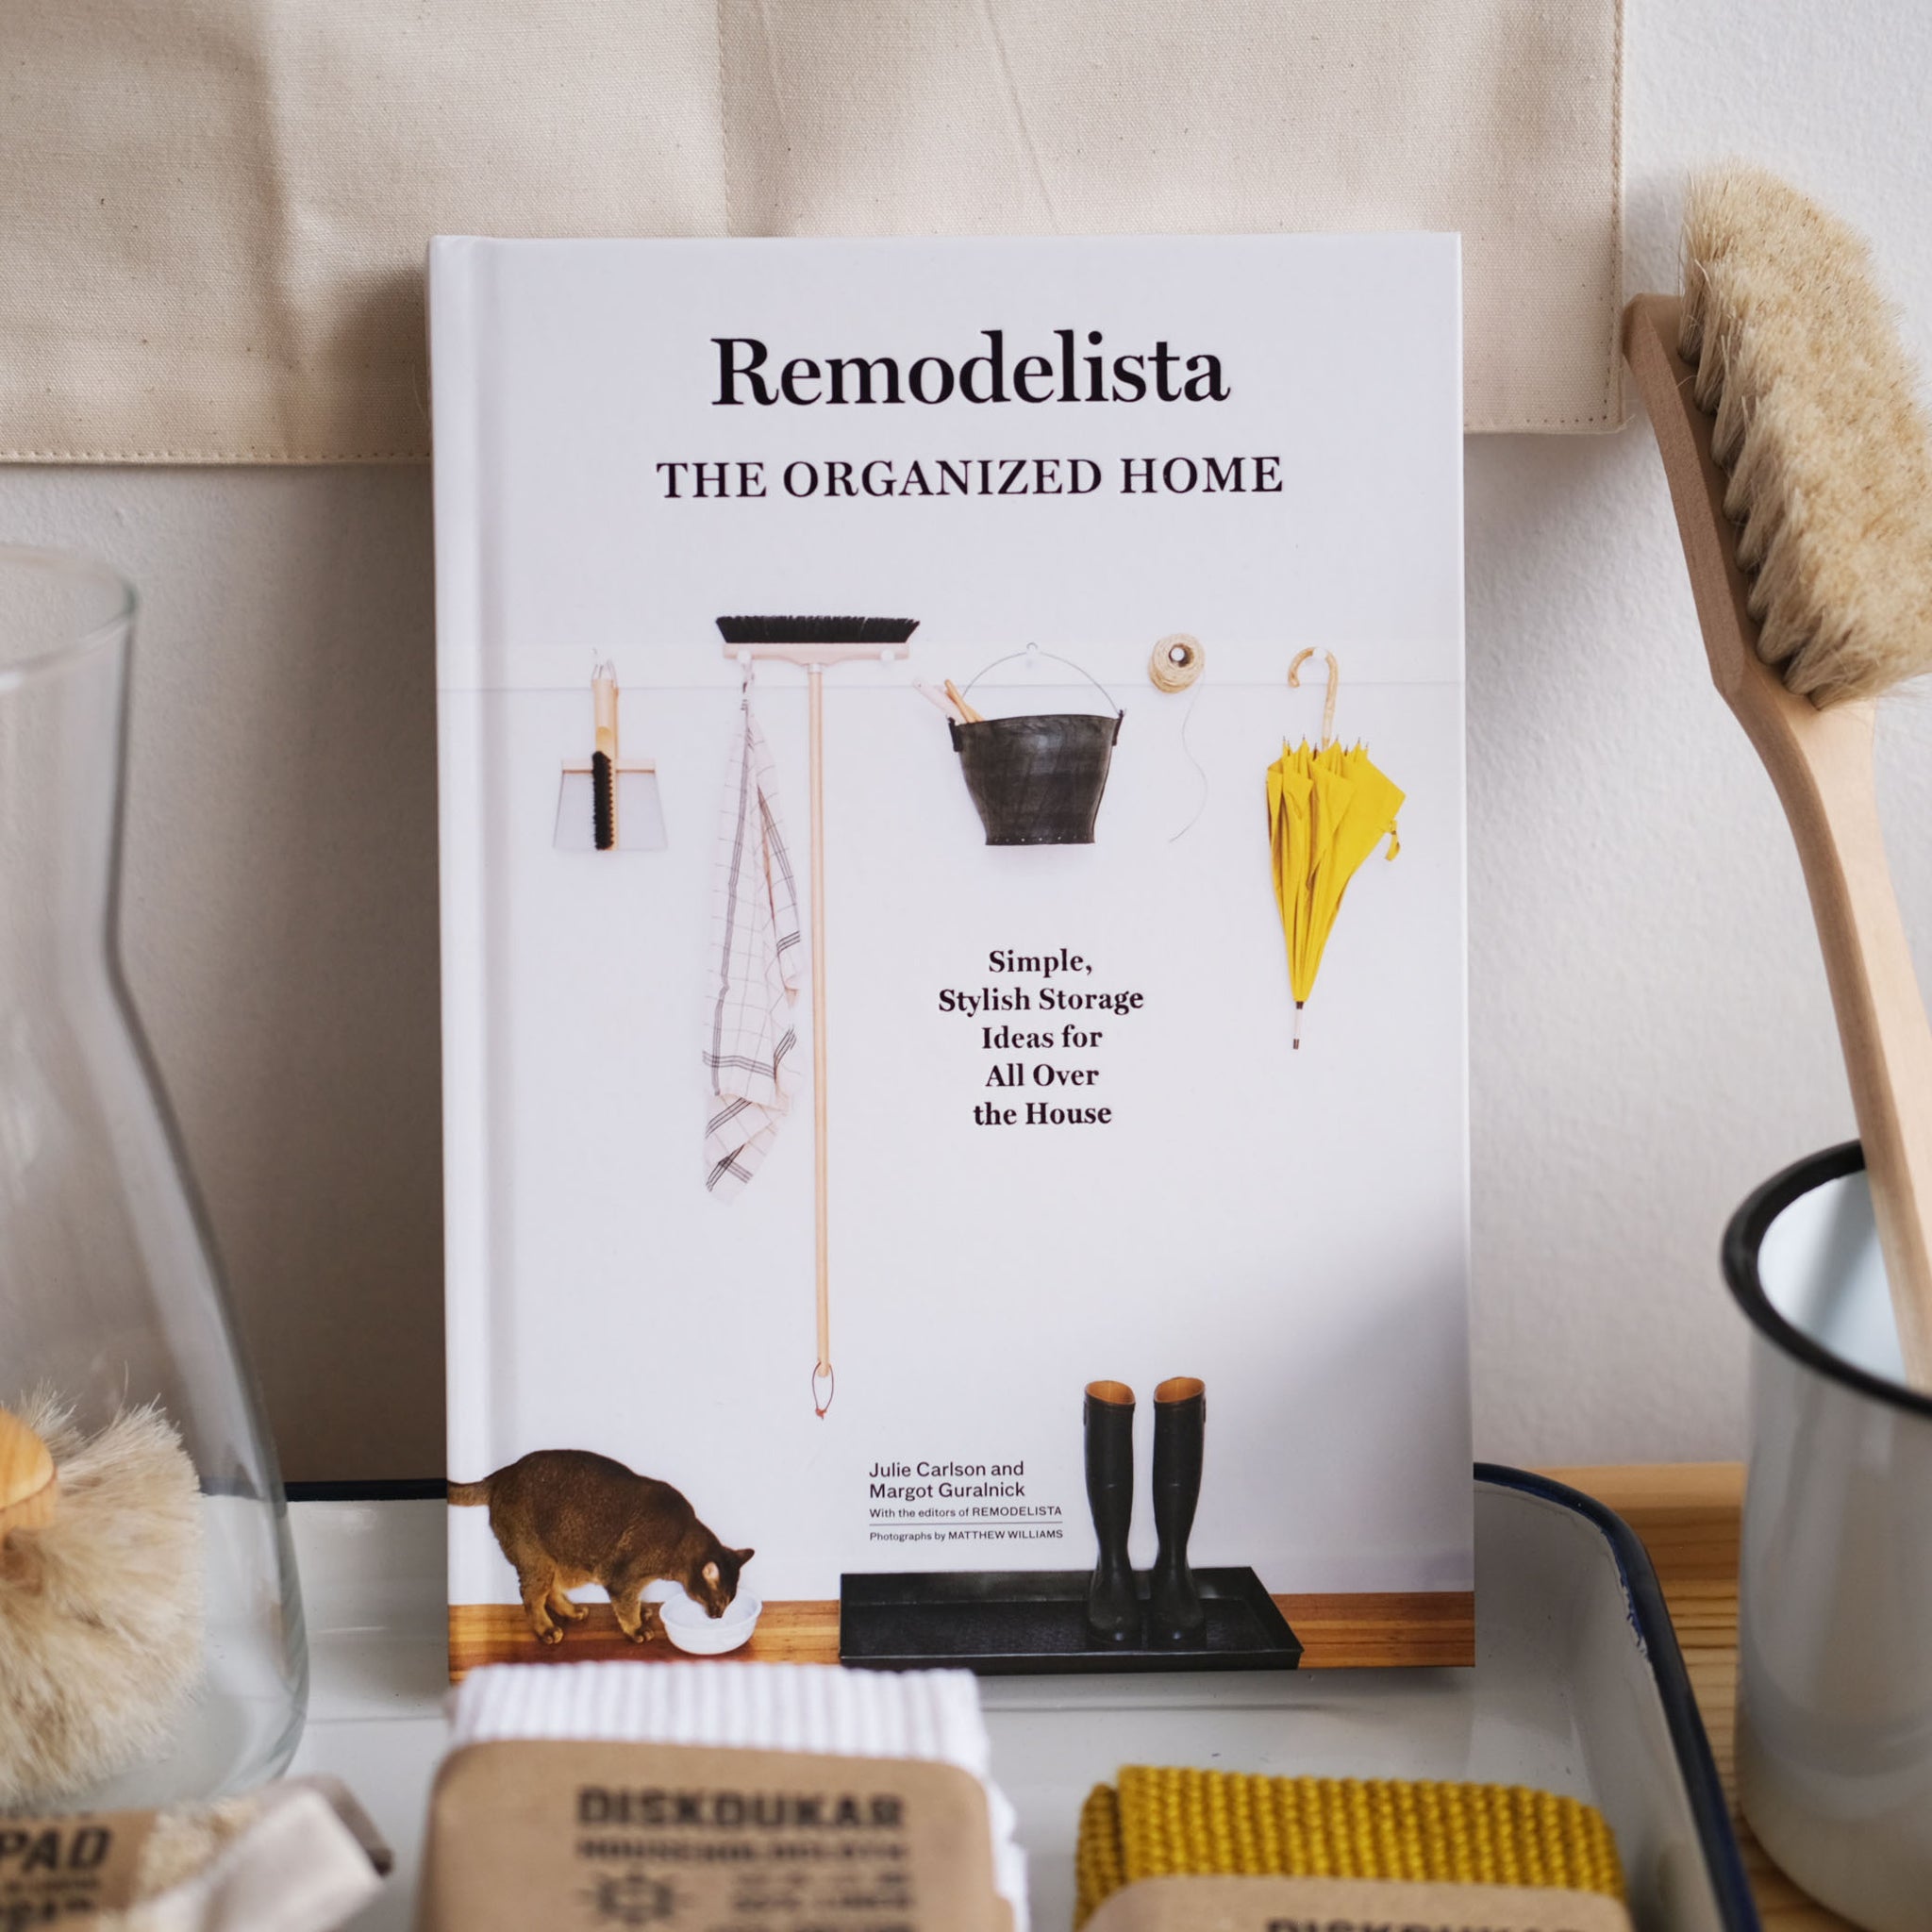 Remodelista: The Organized Home (Hardcover)